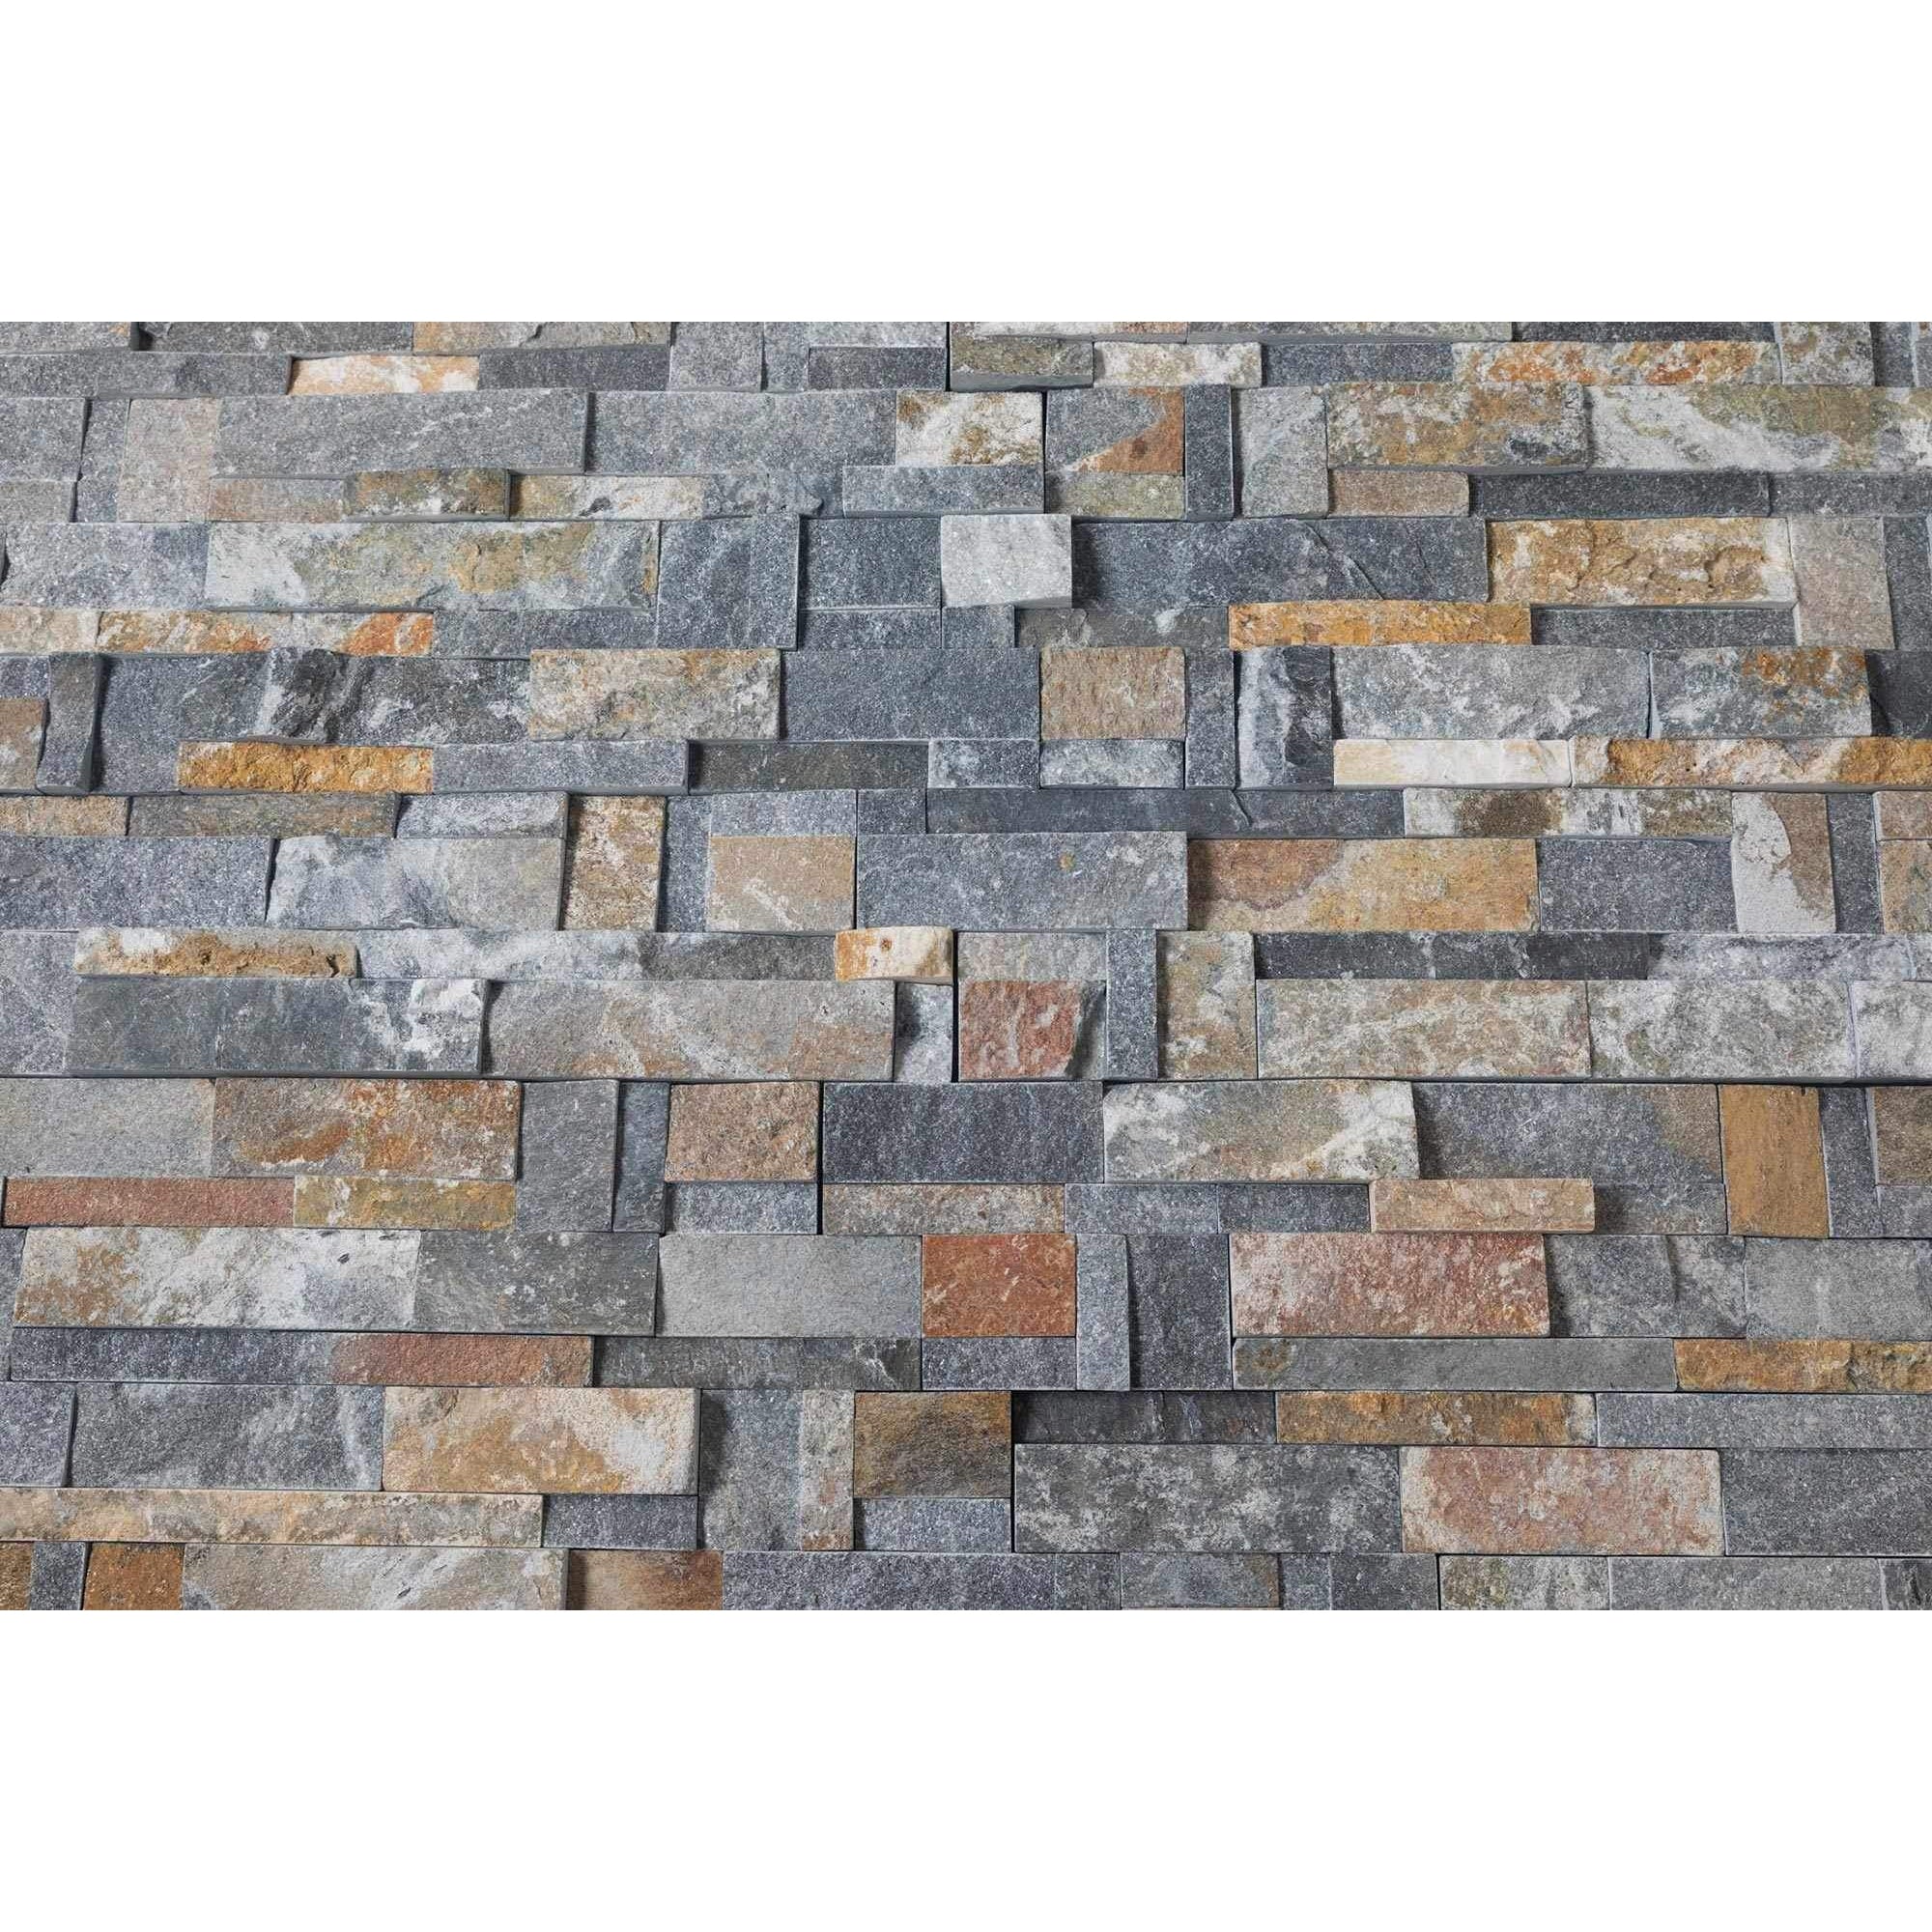 Natural Stacked Stone Wall Cladding Panels - Rusty Black Montage